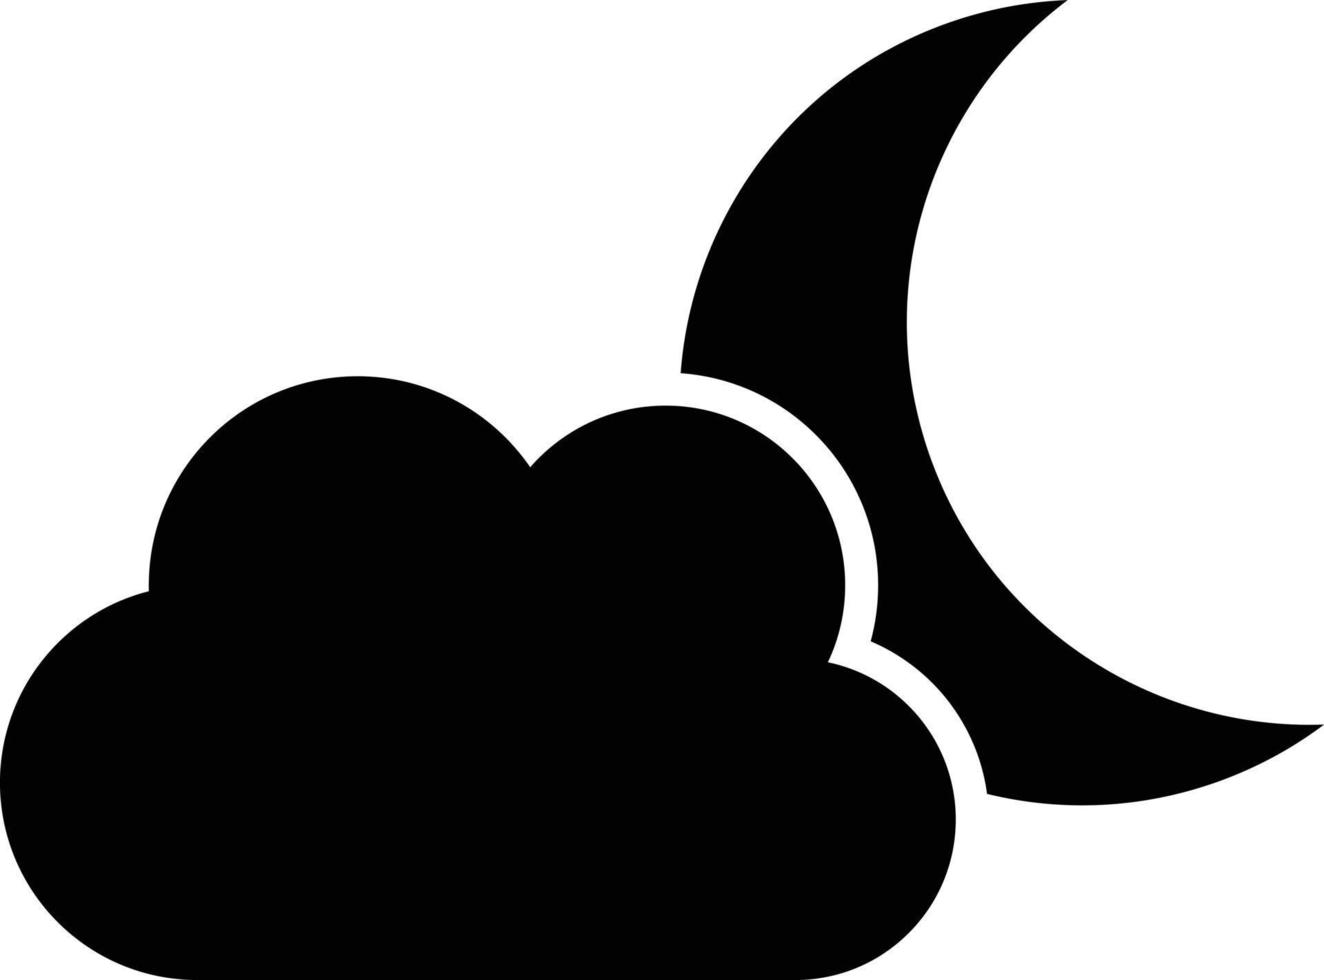 Fog night weather icon vector . Cloud and moon icon . Night icon